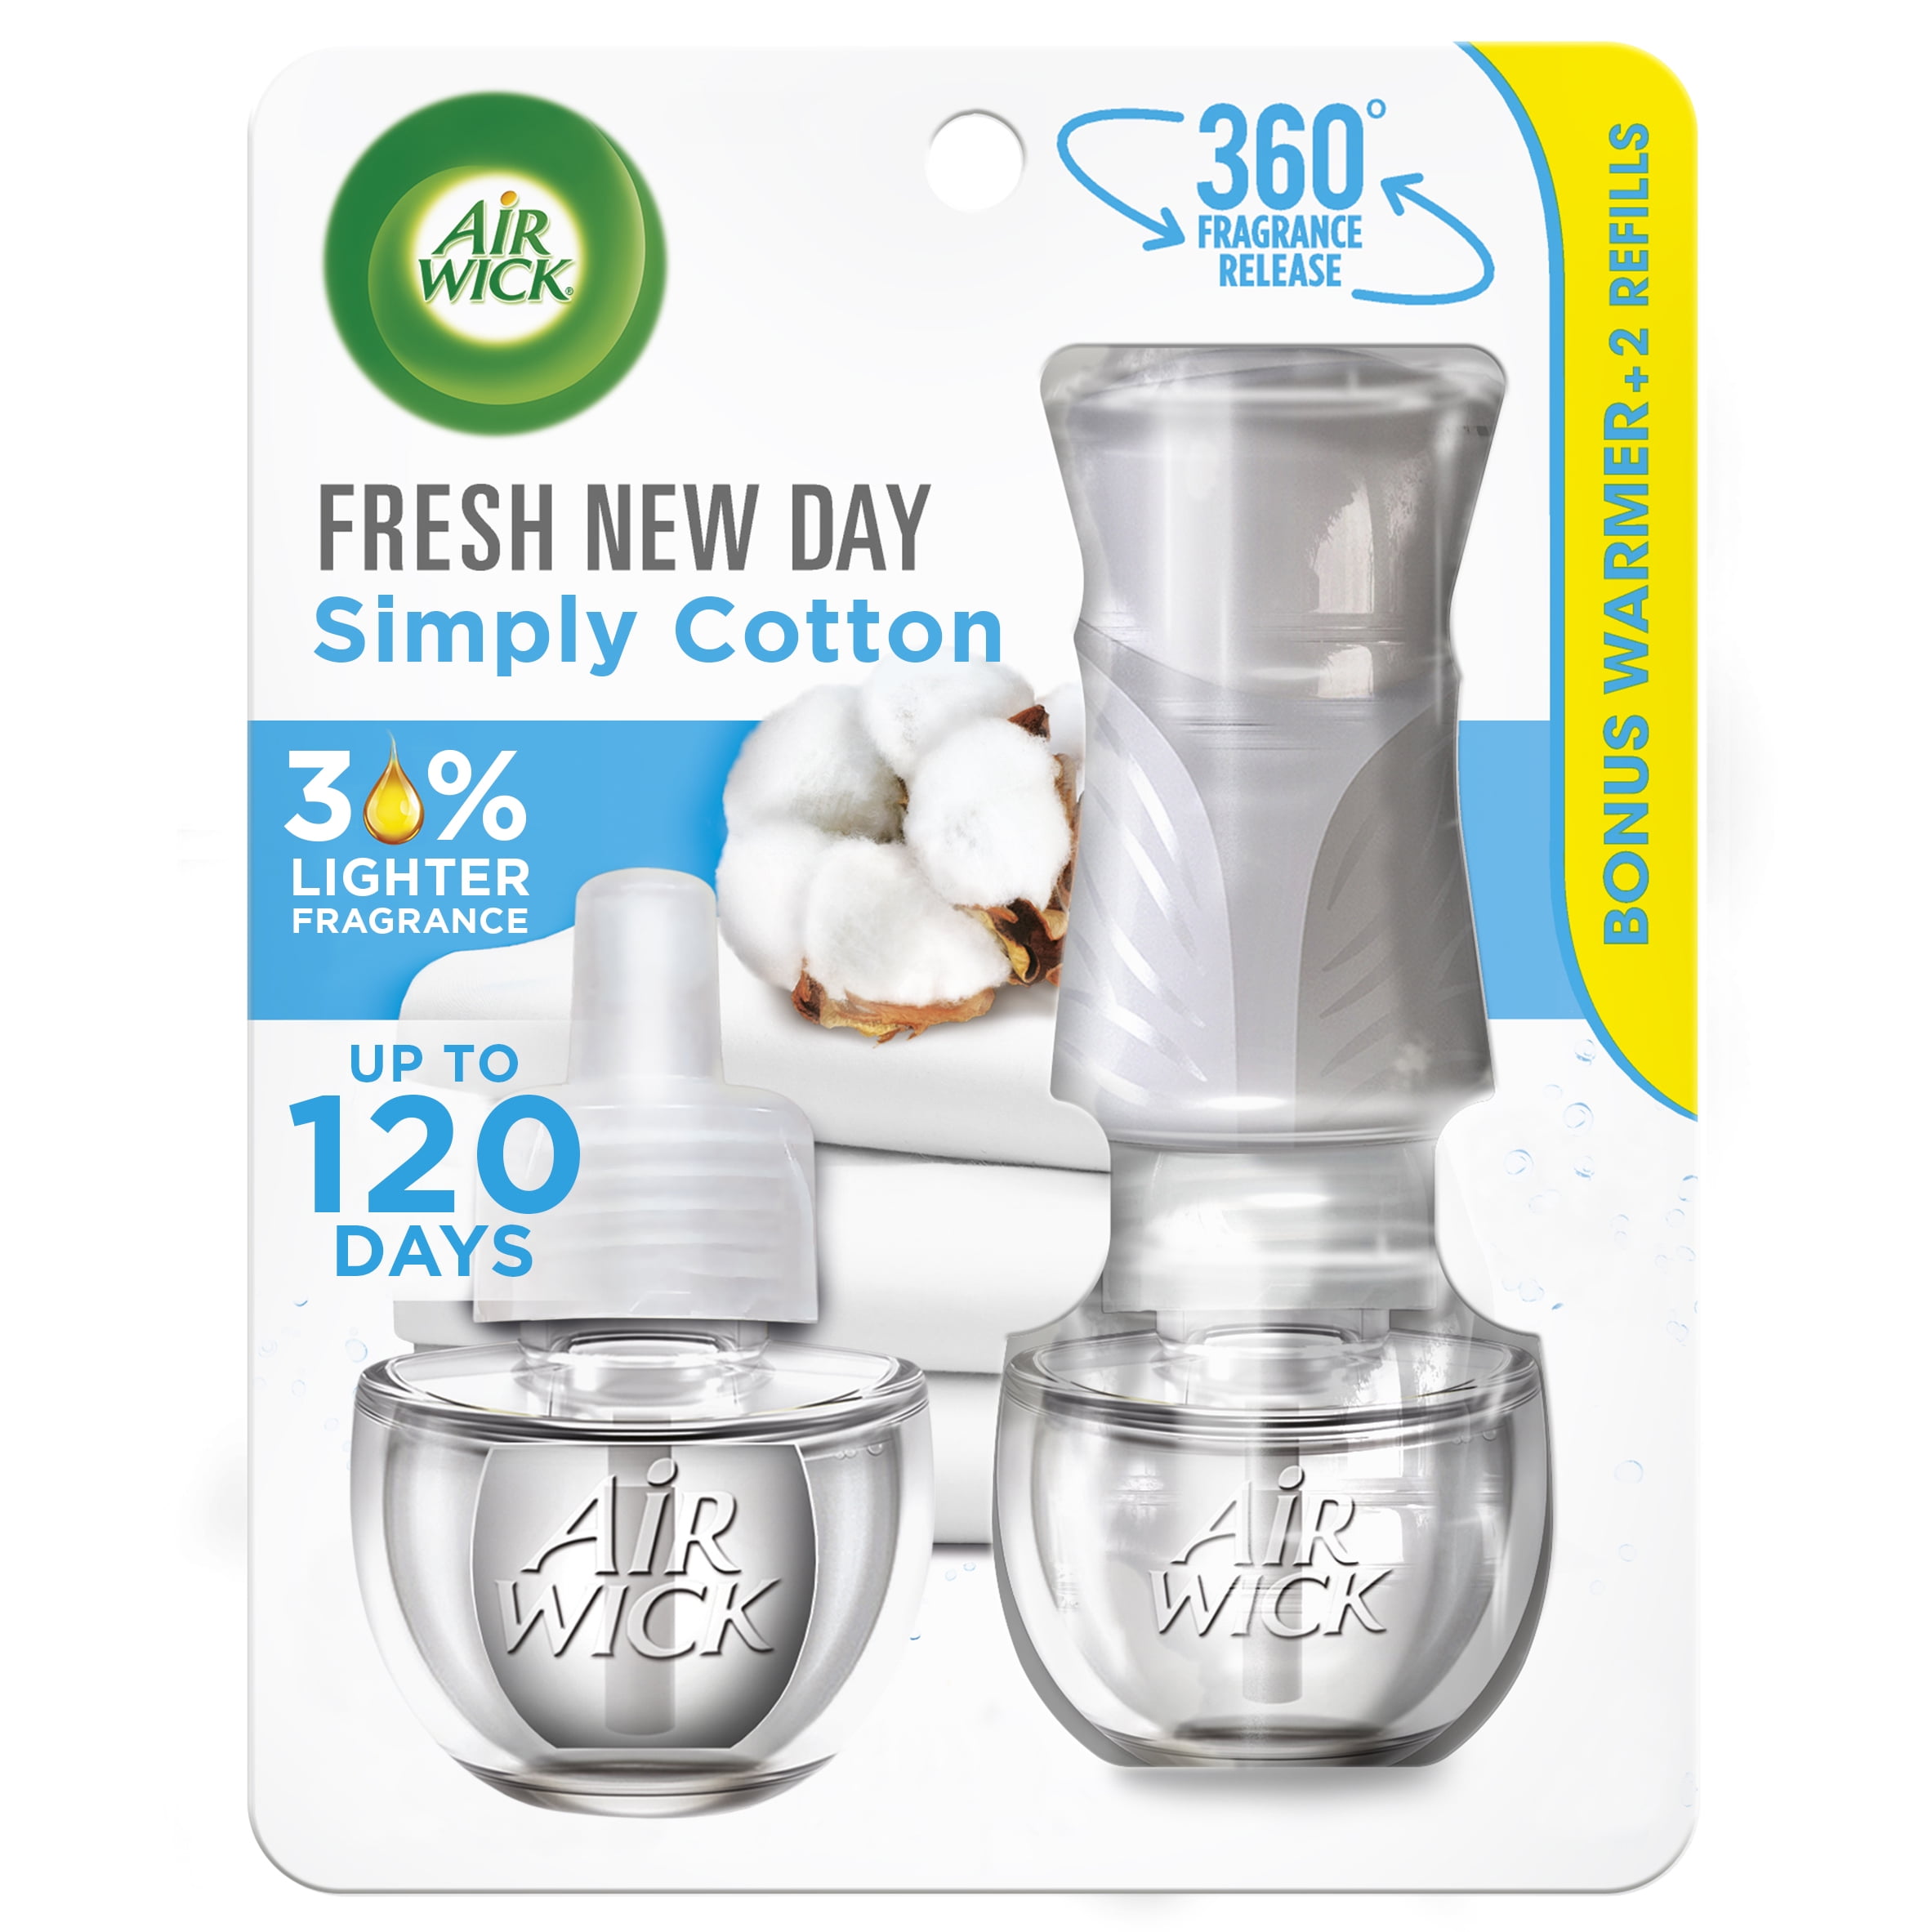 Air Wick Plug in Scented Oil Starter Kit (Warmer + 2 Refills), Fresh New Day Simply Cotton, Air Freshener, Essential Oils, Spring Collection